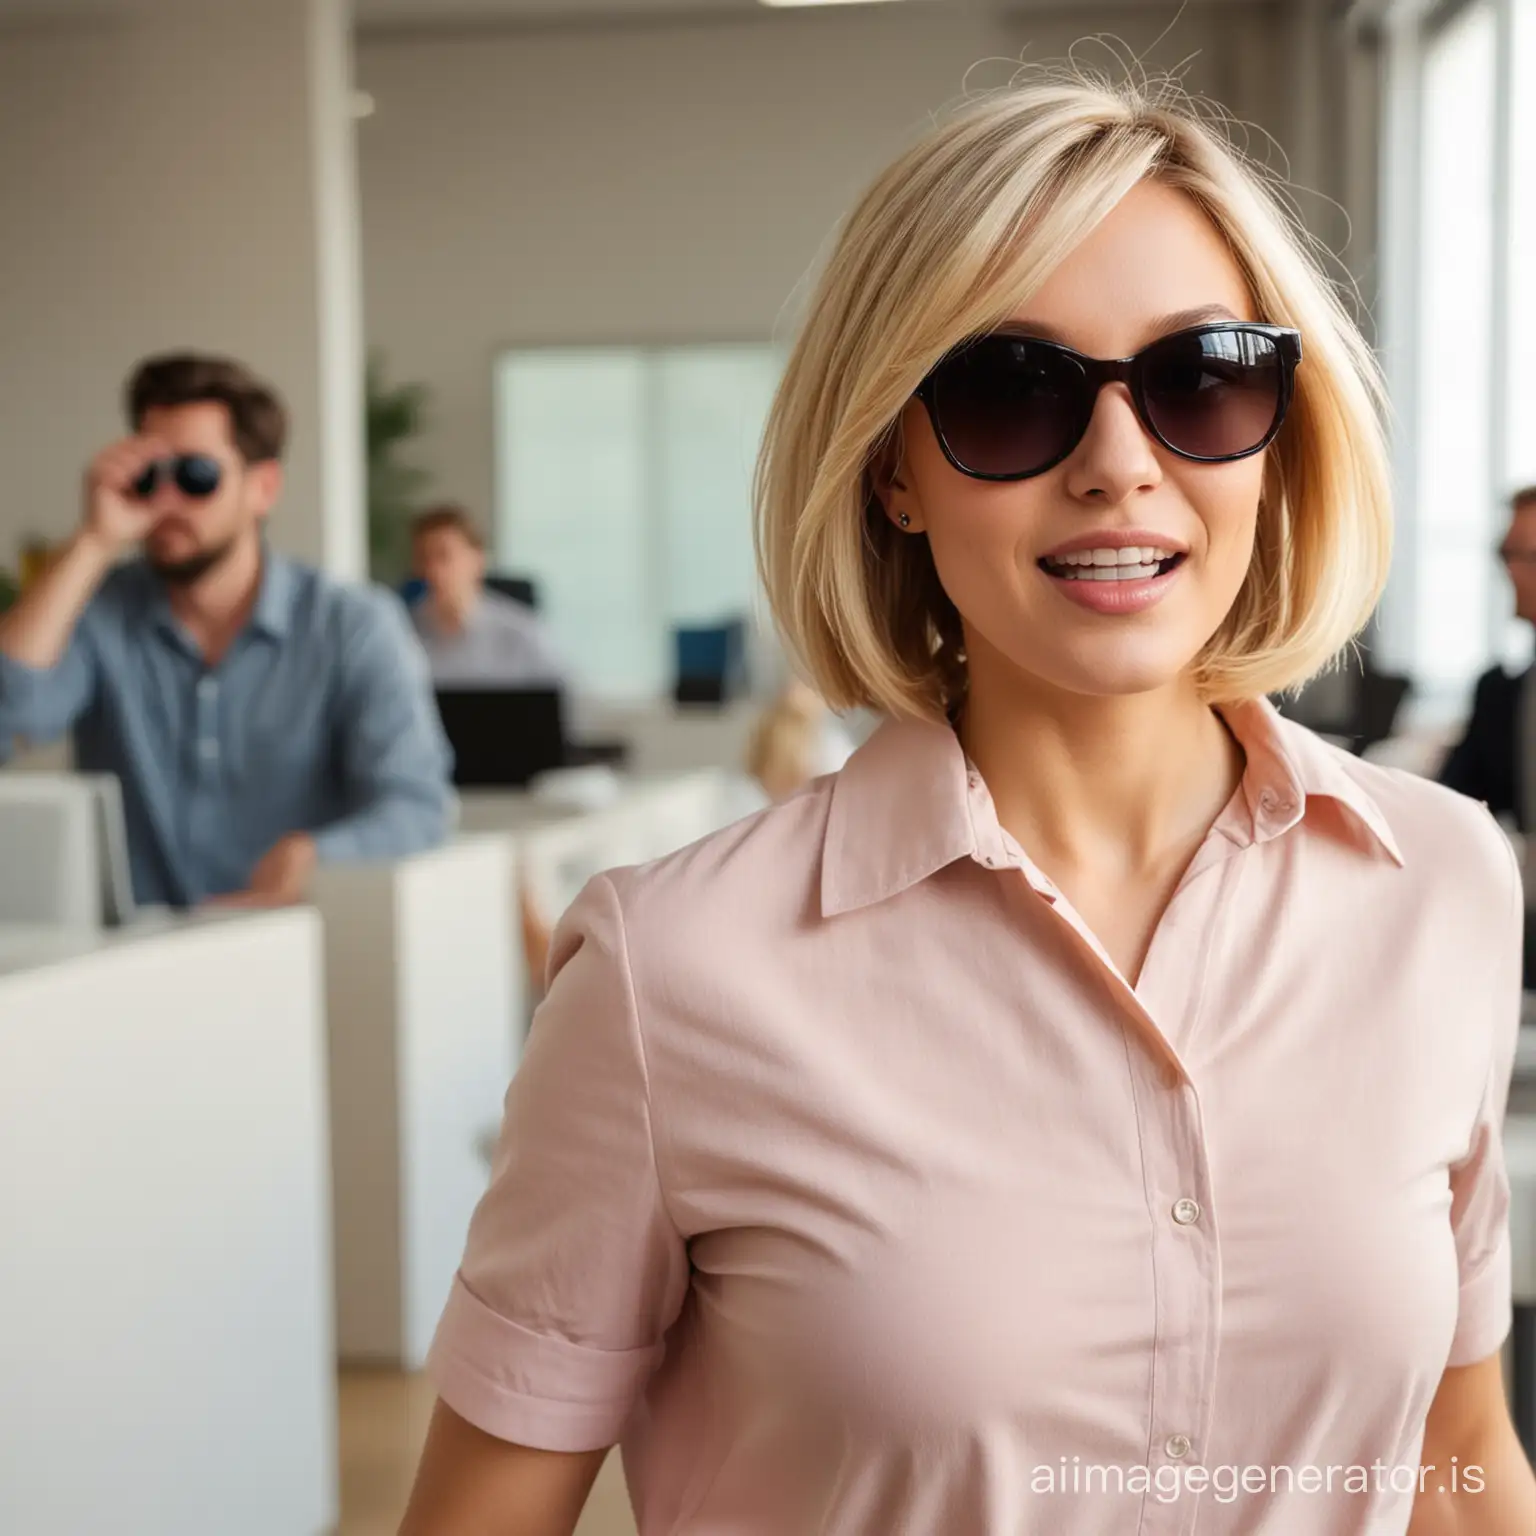 famous blonde woman with a bob cut and sunglasses rushing out the office being photographed by paparazzi  and hiding so she is not photographed 